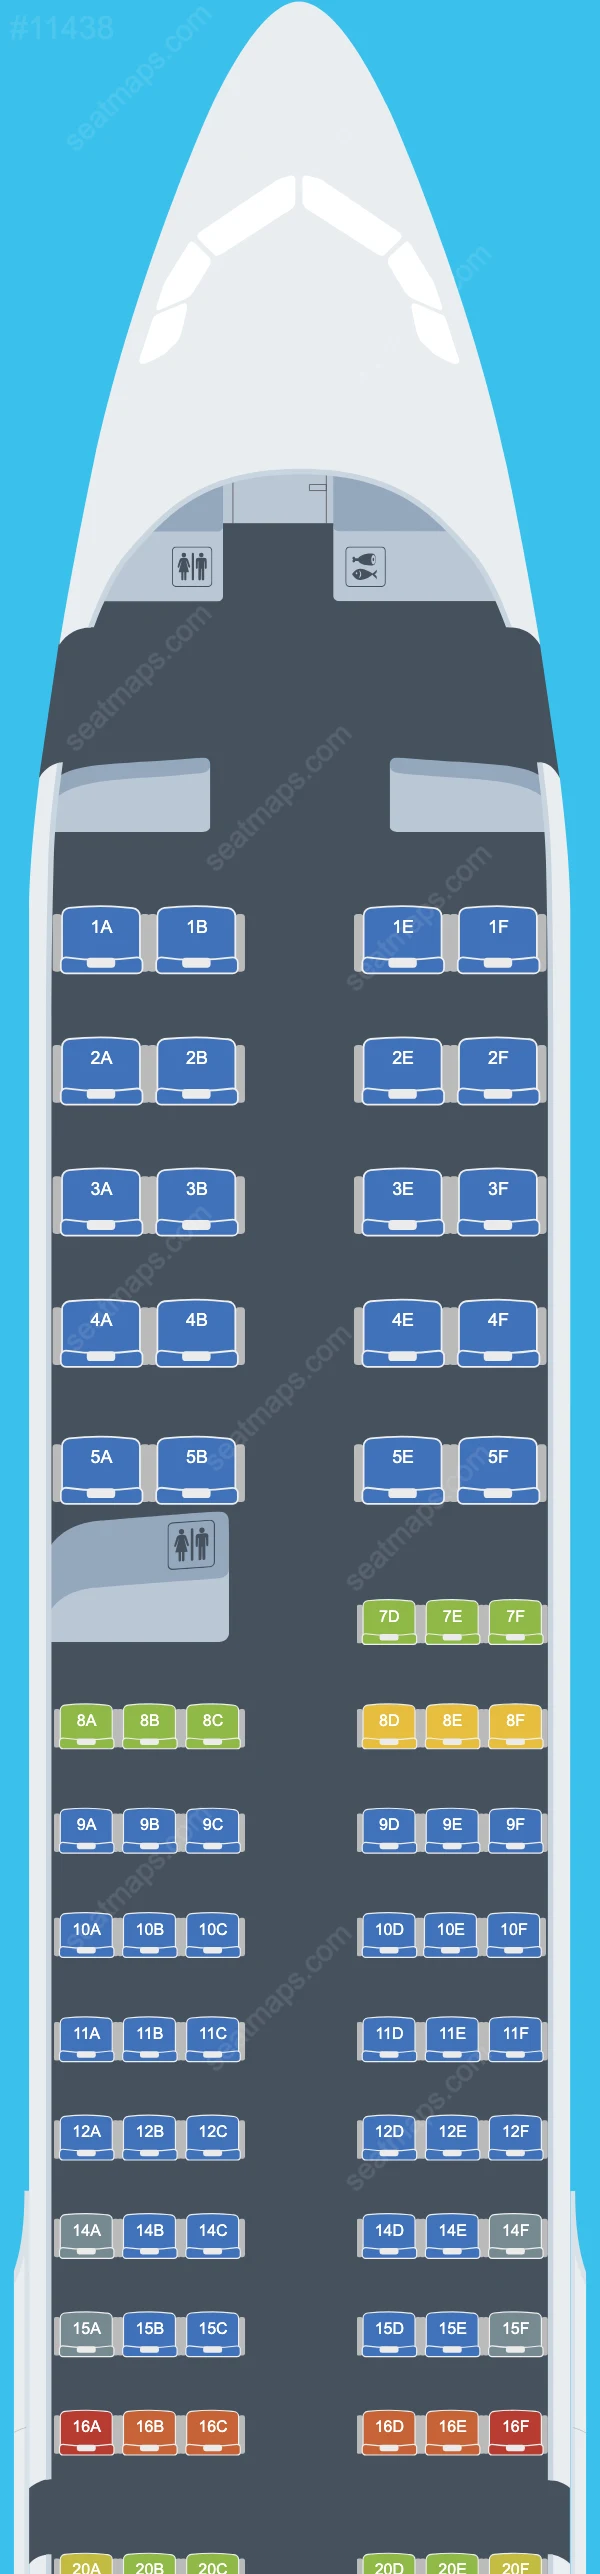 United Airbus A321-200neo seatmap preview